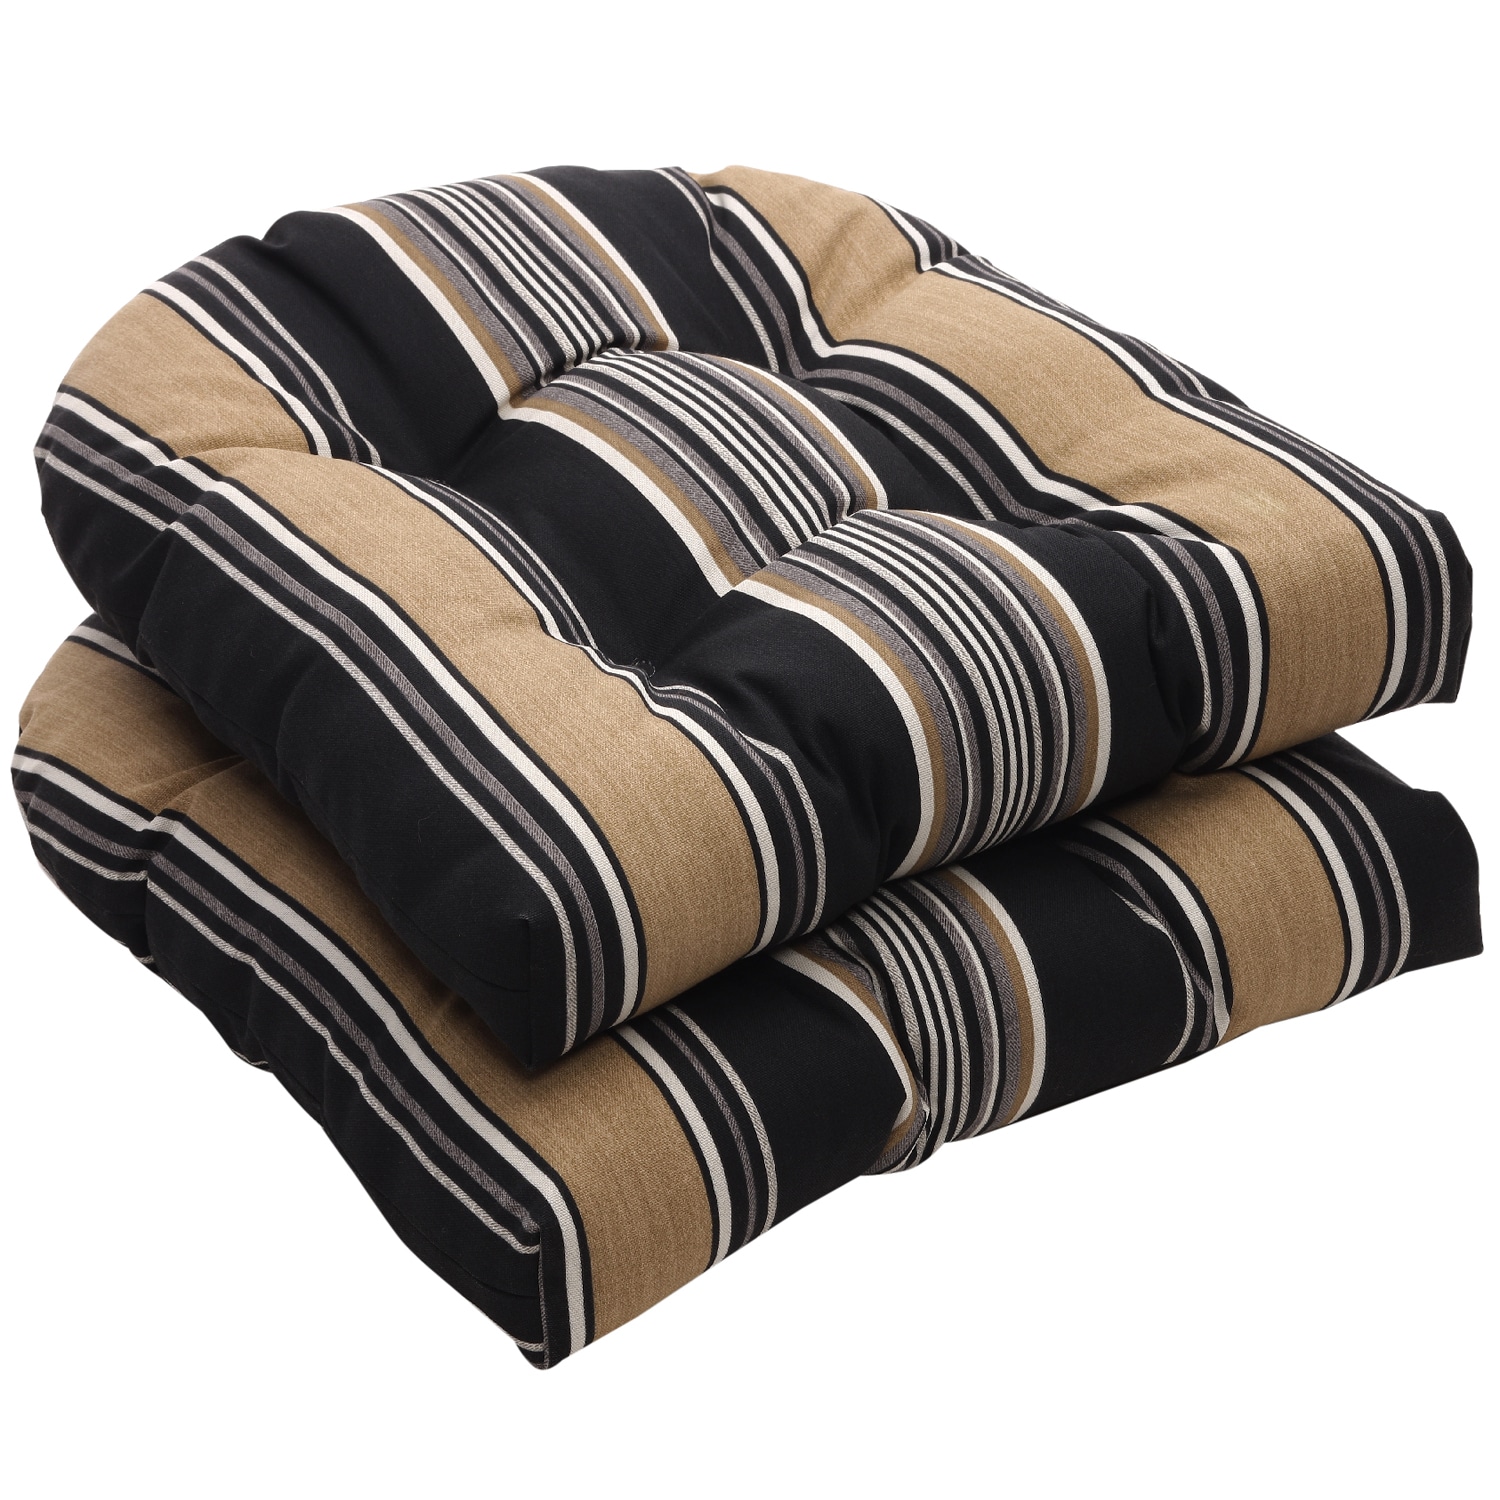 Outdoor Black and Tan Stripe Wicker Seat Cushions (Set of 2